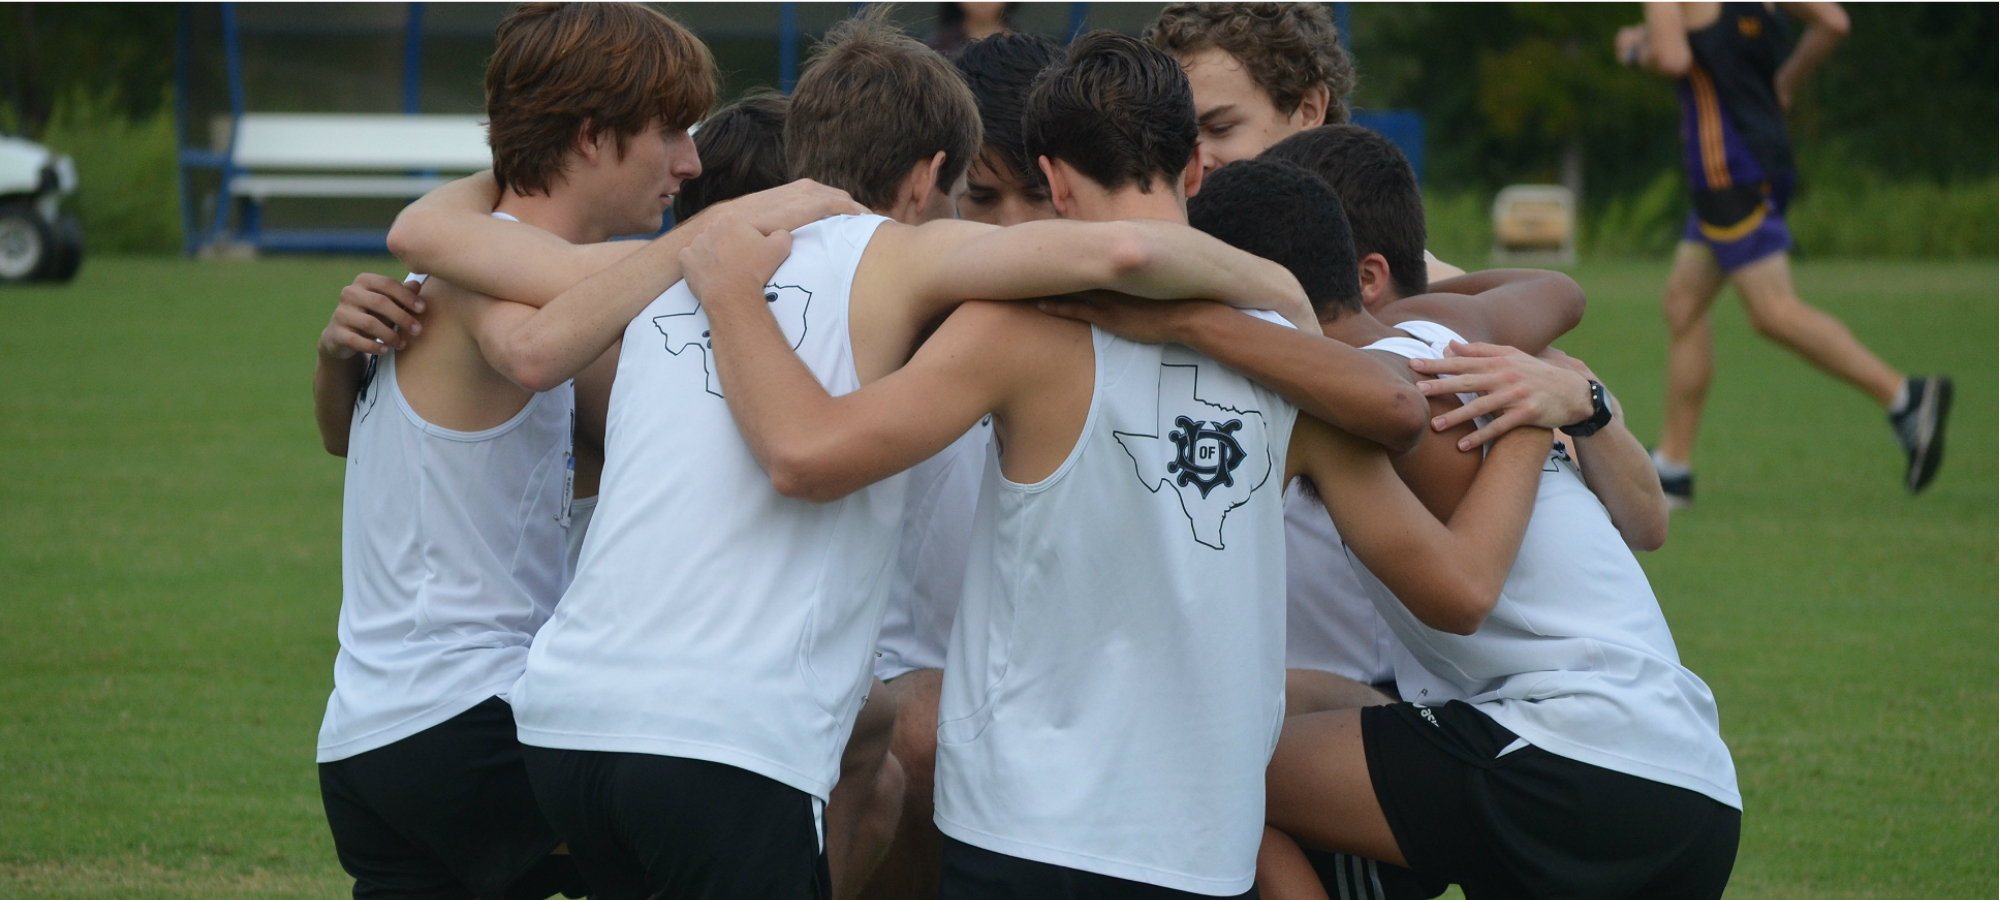 Cross Country Prepares for SCAC Championship this Weekend